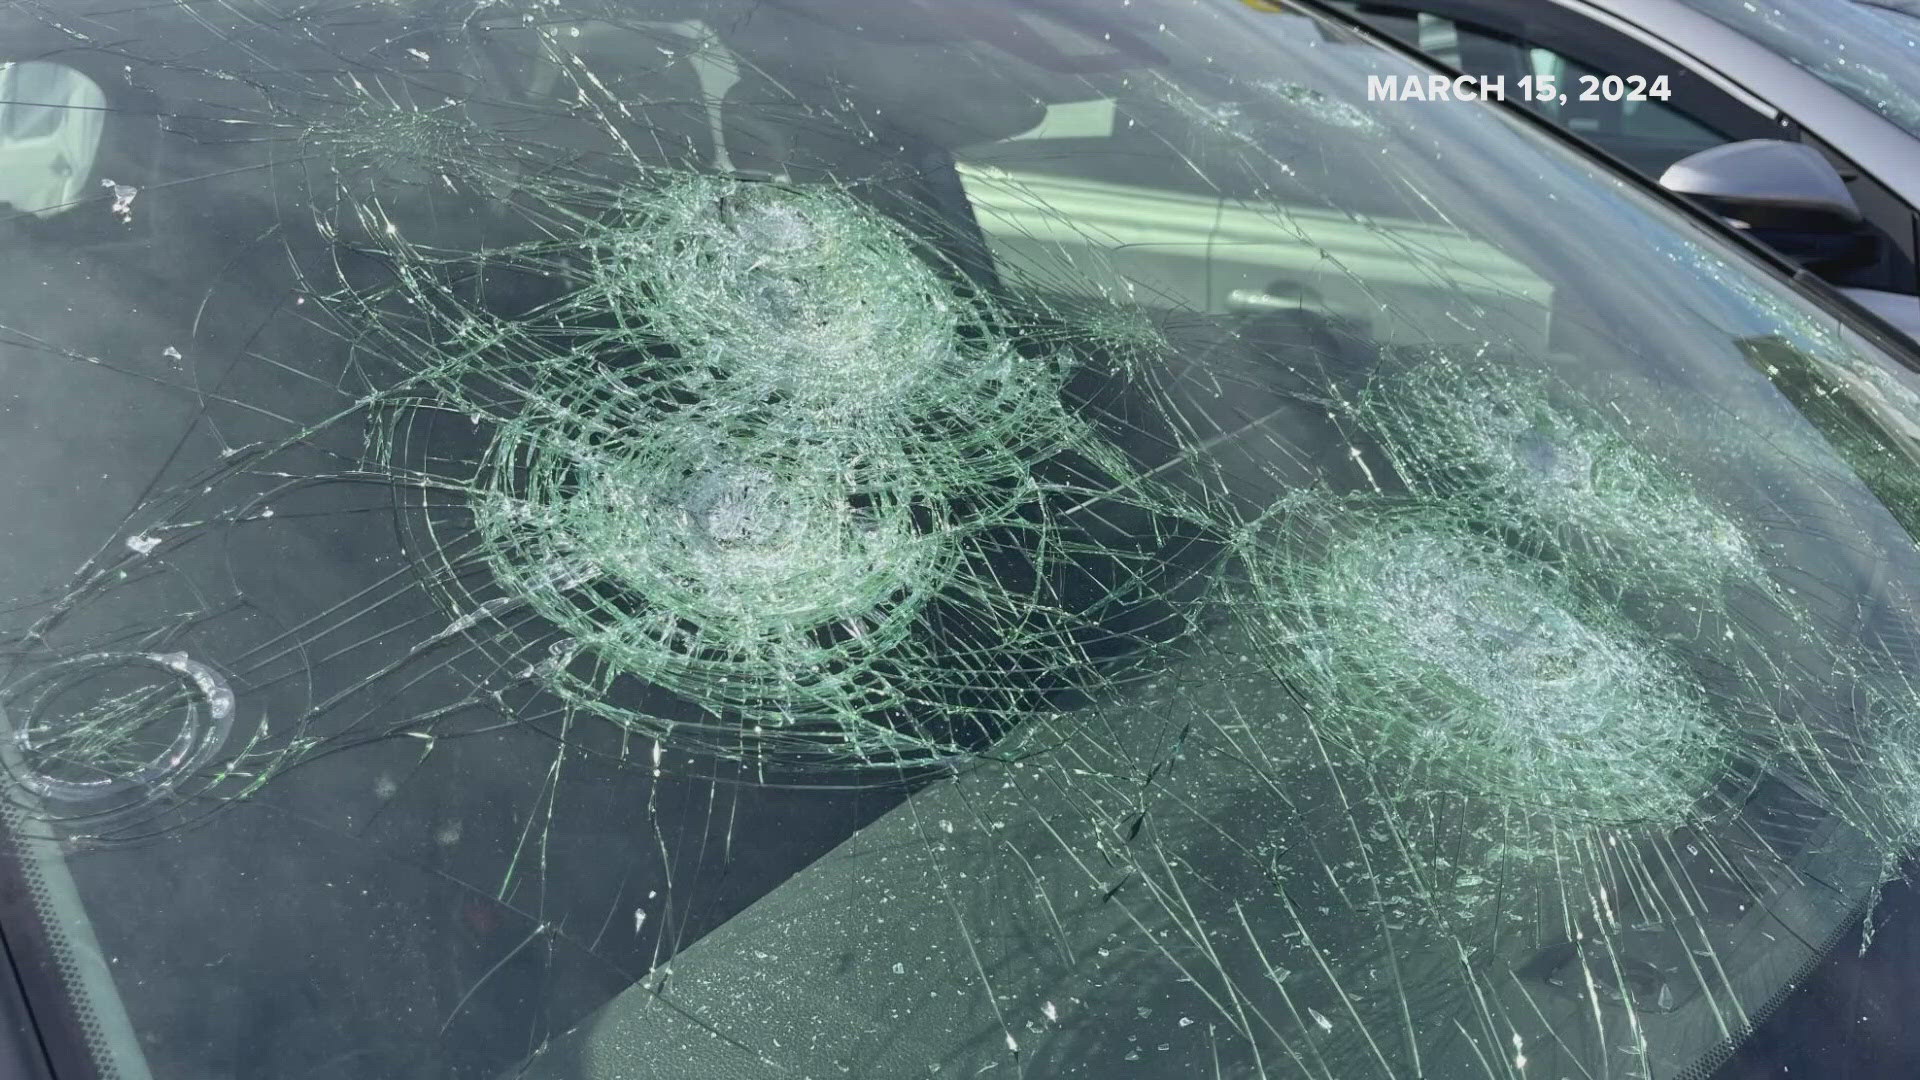 Baseball-sized hail pelted St. Charles County just two months ago, causing massive damage to cars and homes. Car dealers now trying to prepare for incoming hail.